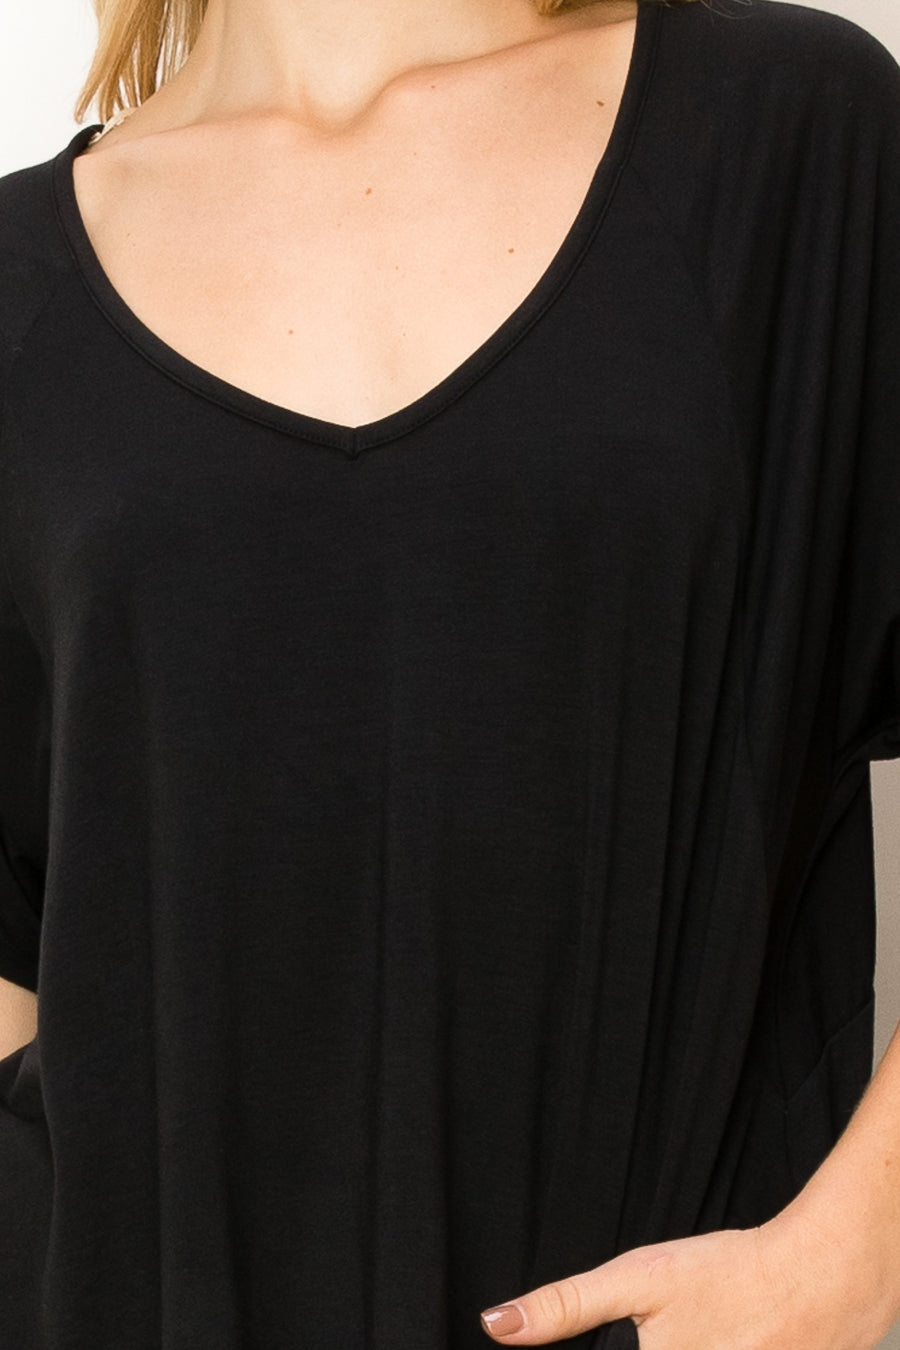 A woman wearing a HYFVE Oversized Short Sleeve Top with a v-neck.